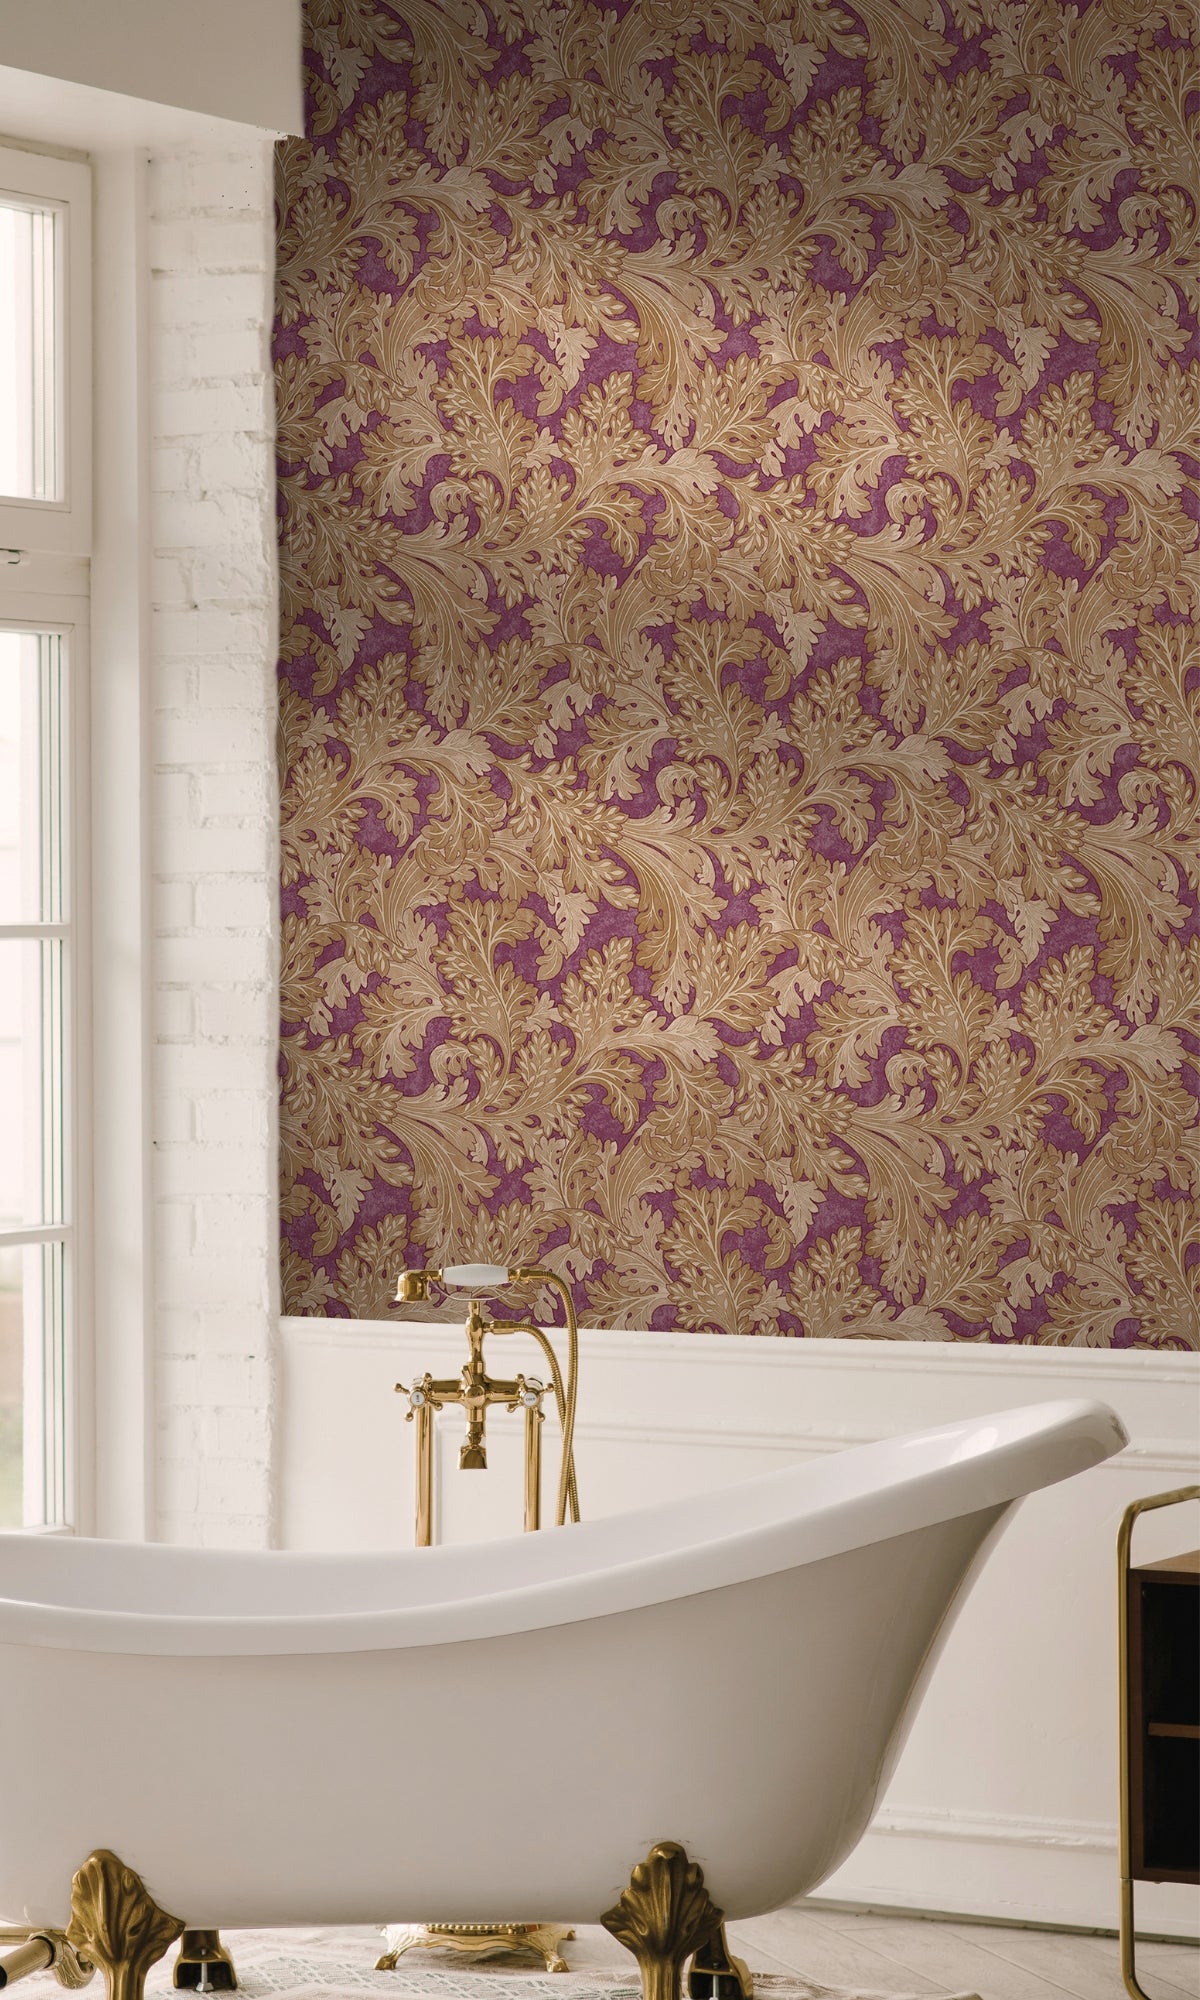 Berry Curling Leaves Tropical Wallpaper R9007